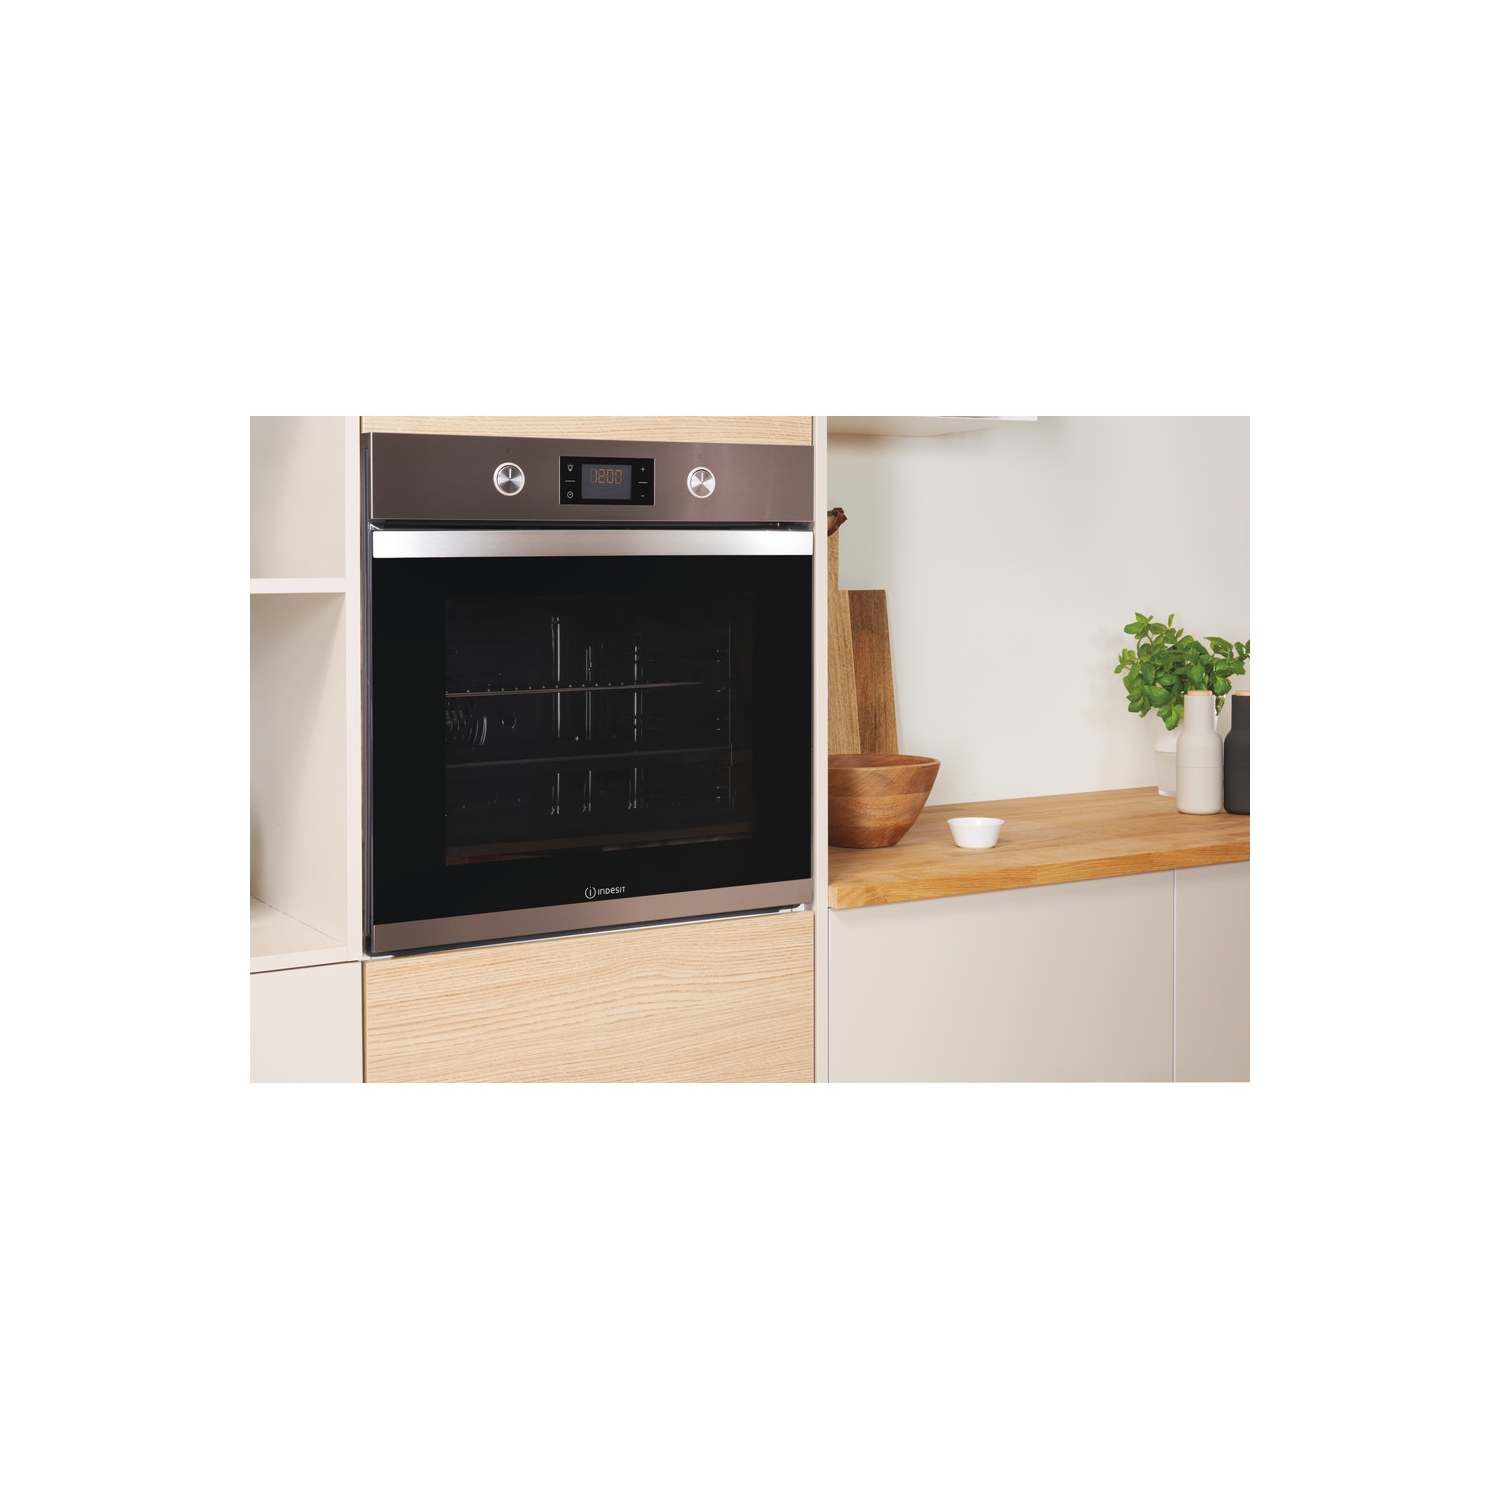 Indesit Built In Electric Single Oven - Stainless Steel - A+ Rated - 6